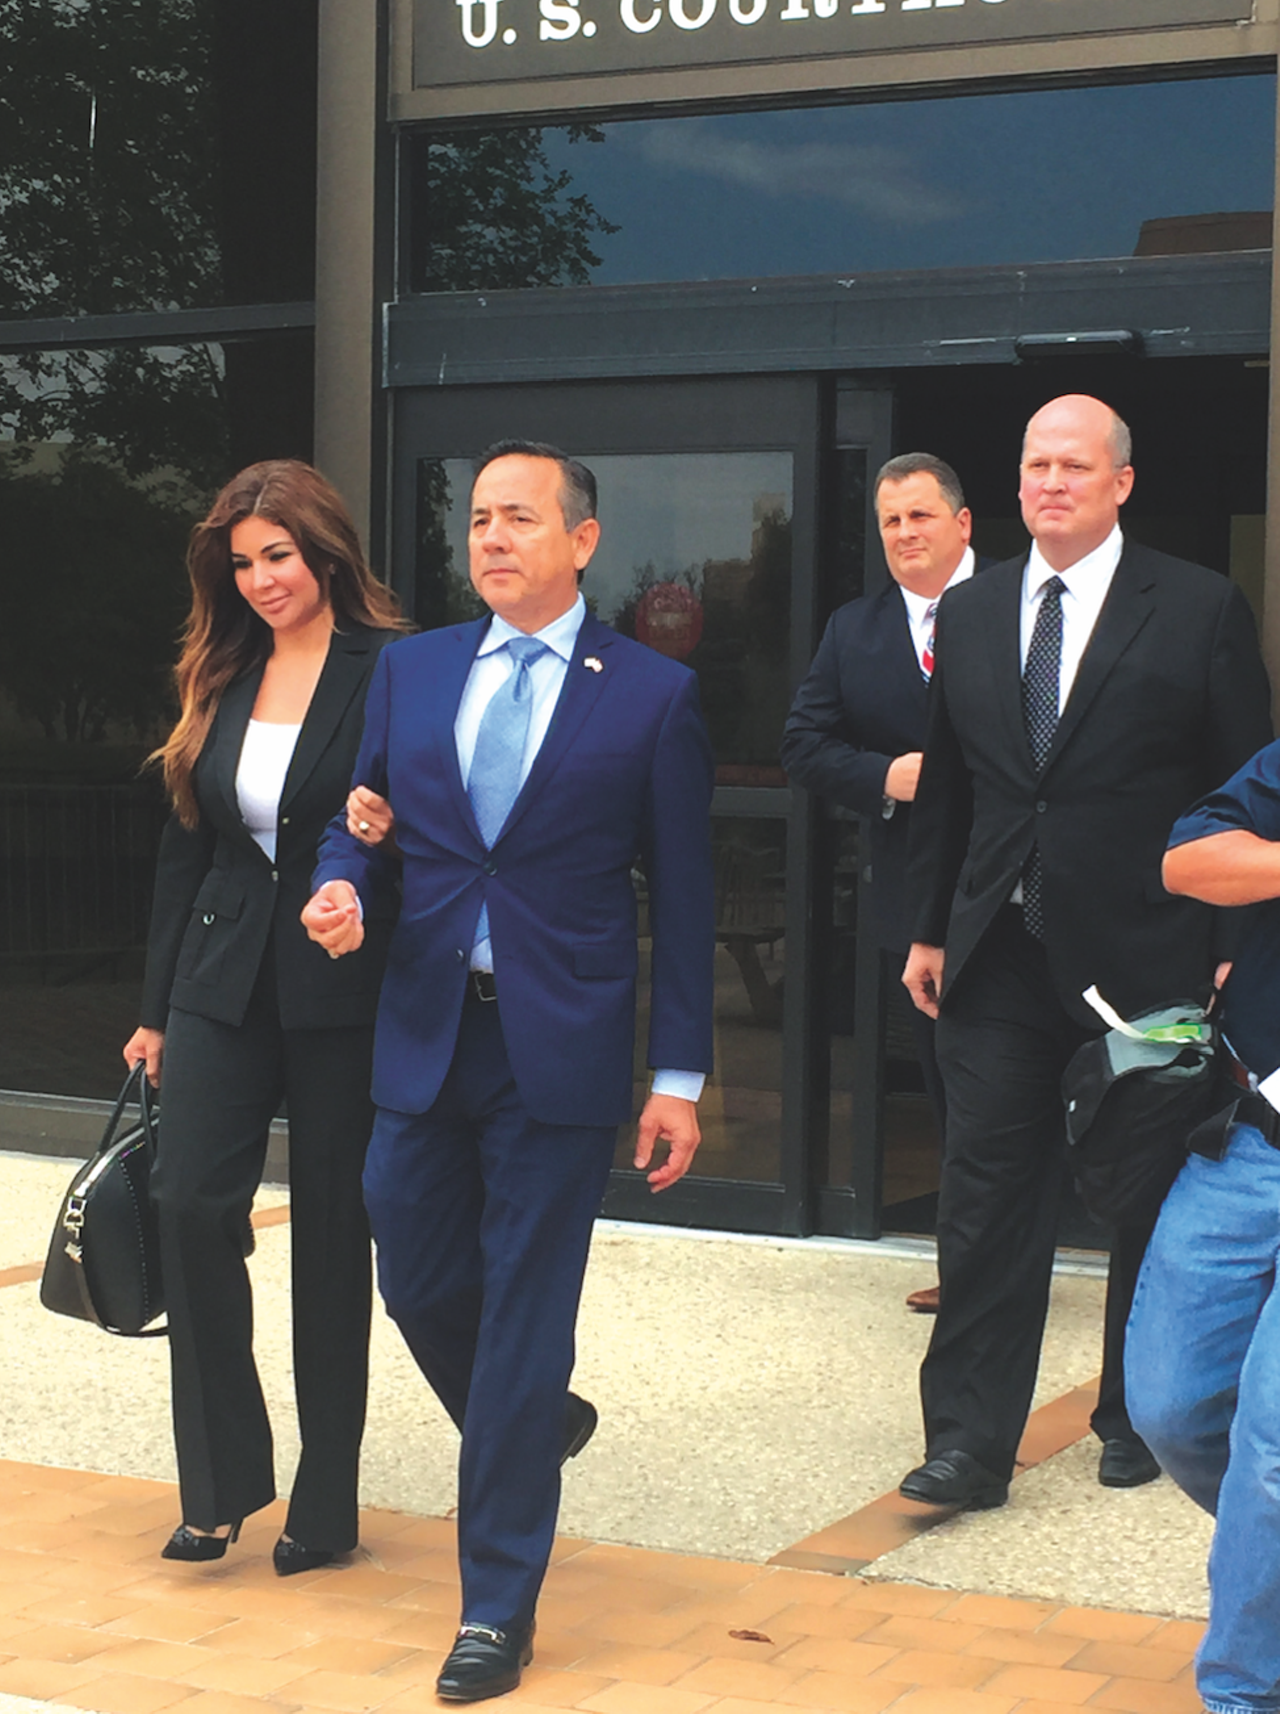 Carlos Uresti’s Pyramid Scheme
After years of scandals and pressure for action to be taken, former state senator Carlos Uresti was found guilty of 11 counts of fraud and money laundering charges for his role in the FourWinds Ponzi scheme. Investors, including a woman he had an affair with, of the defunct fracking sand company lost their money while Uresti and others profited. He was sentenced to 12 years in prison.
Photo by Alex Zielinski